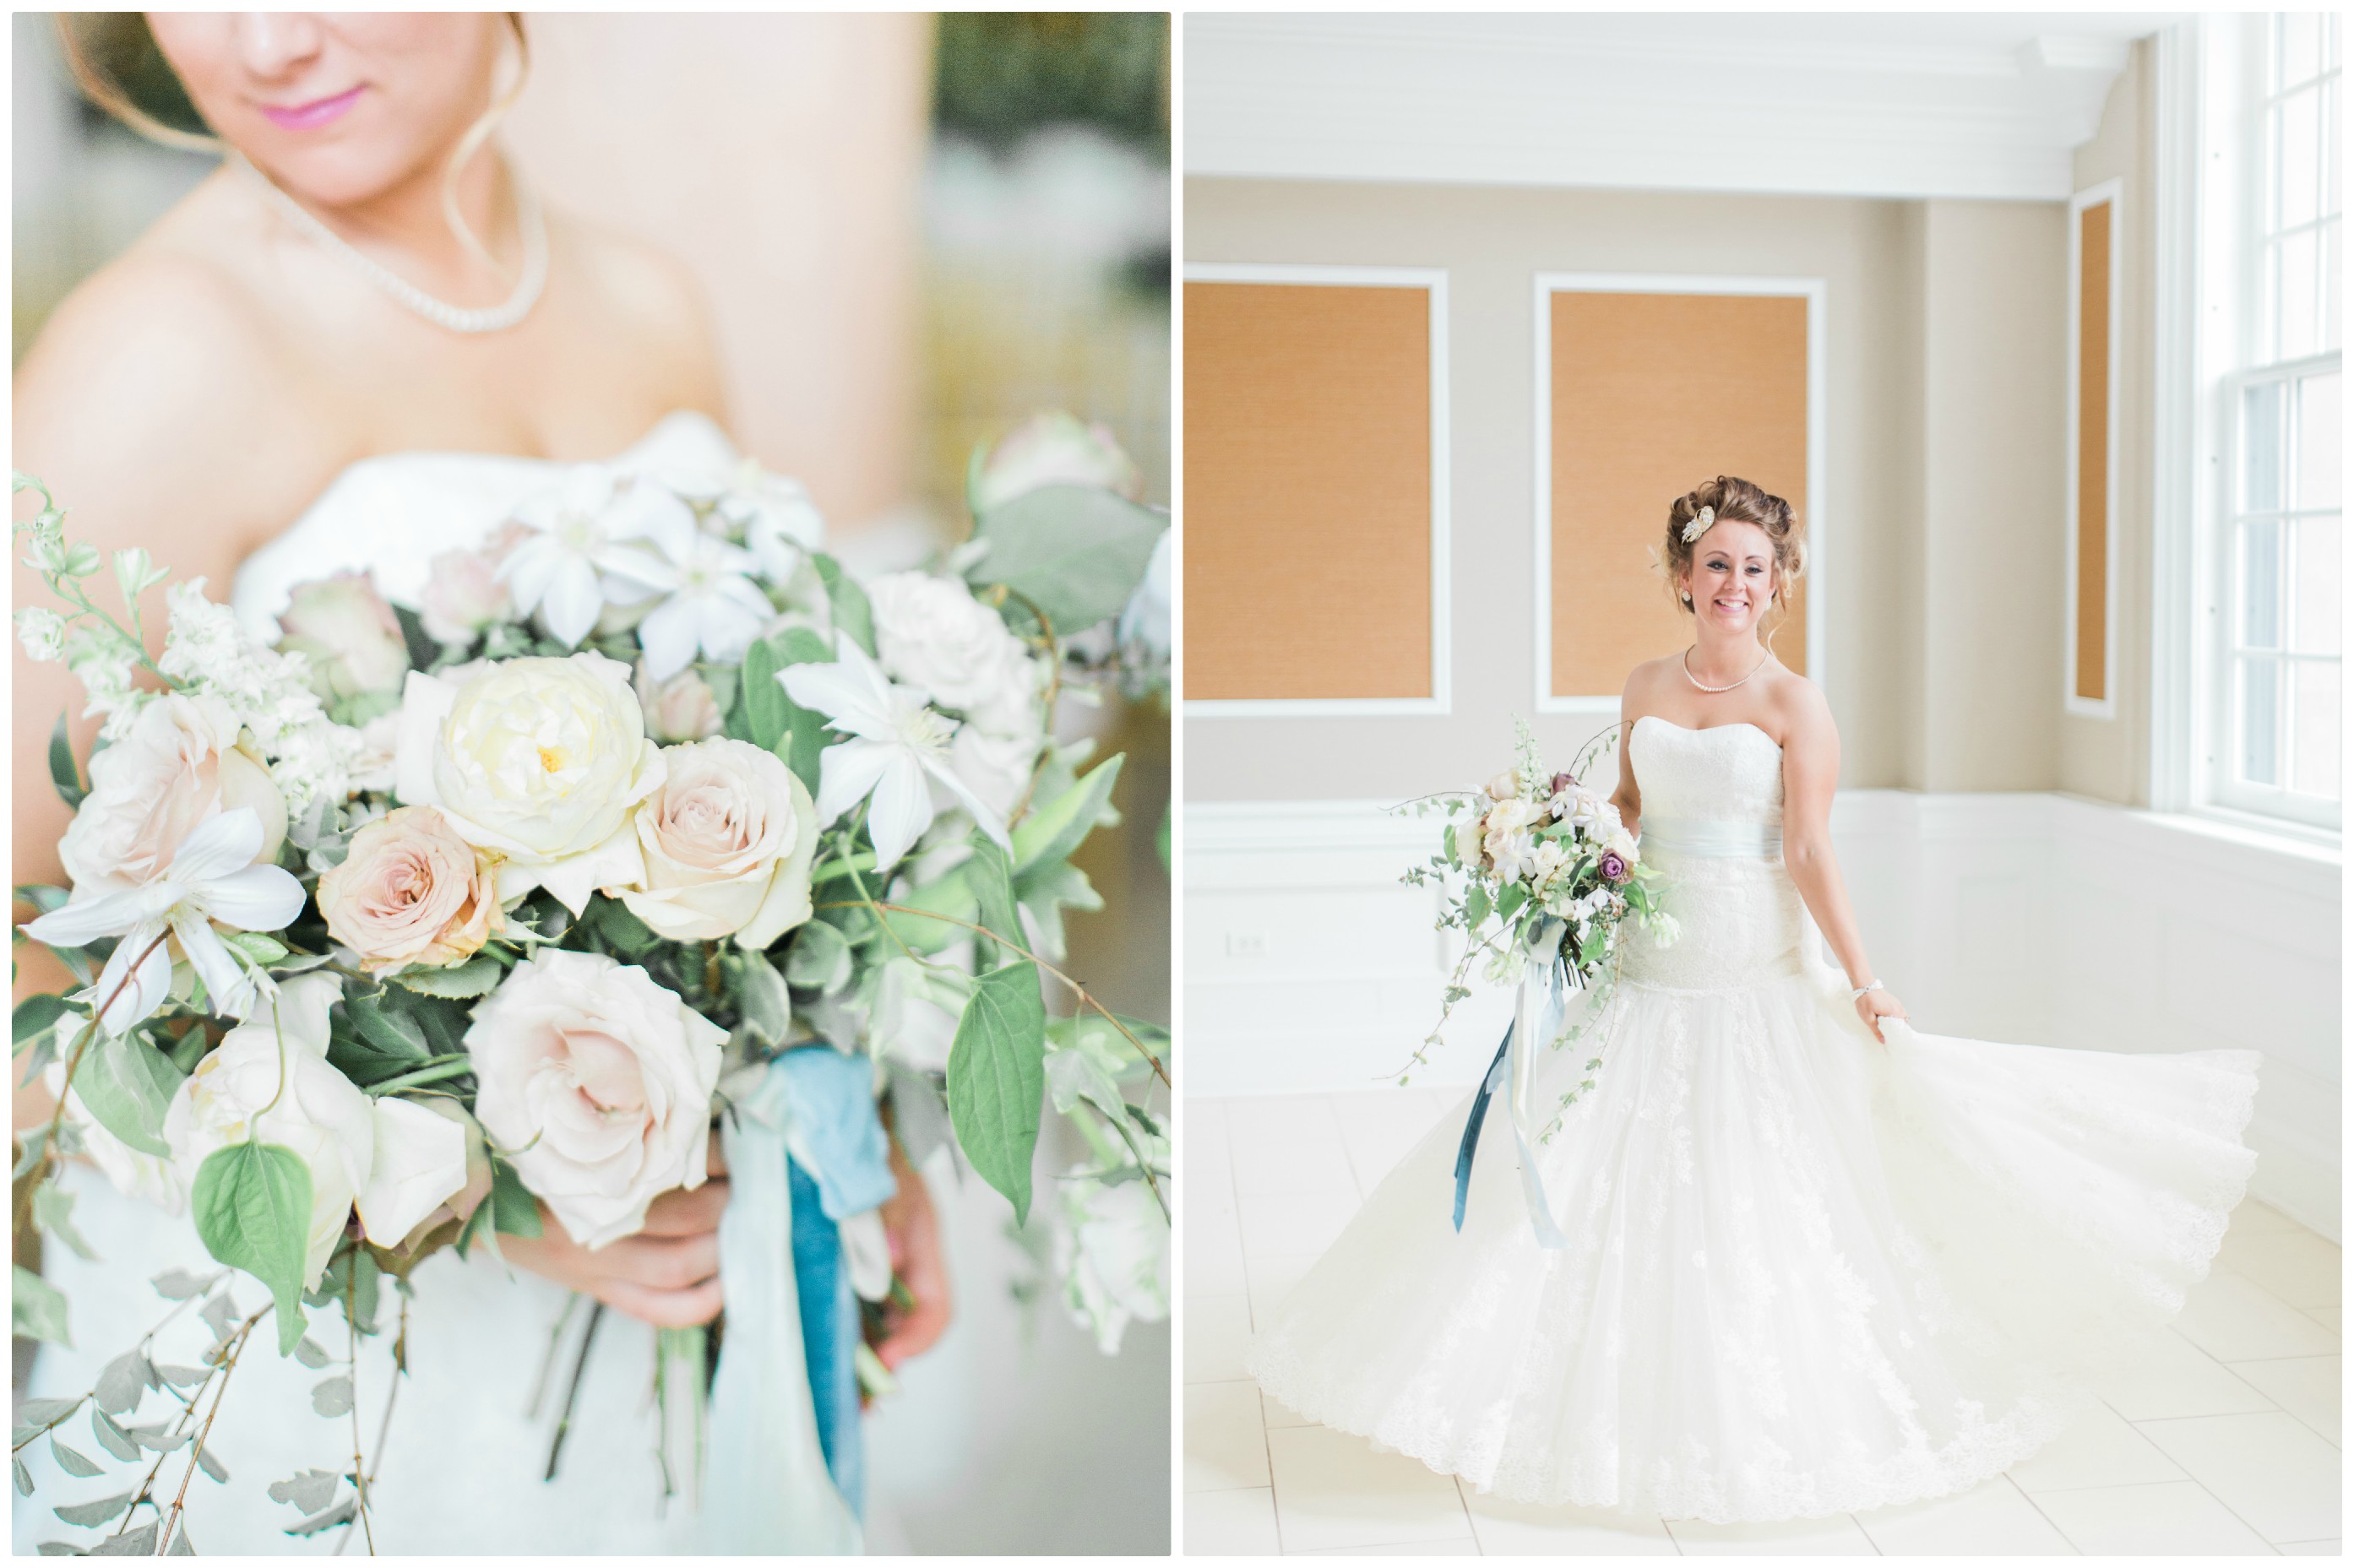 The Durant Flint Weddings | The Day's Design | Samantha James Photography